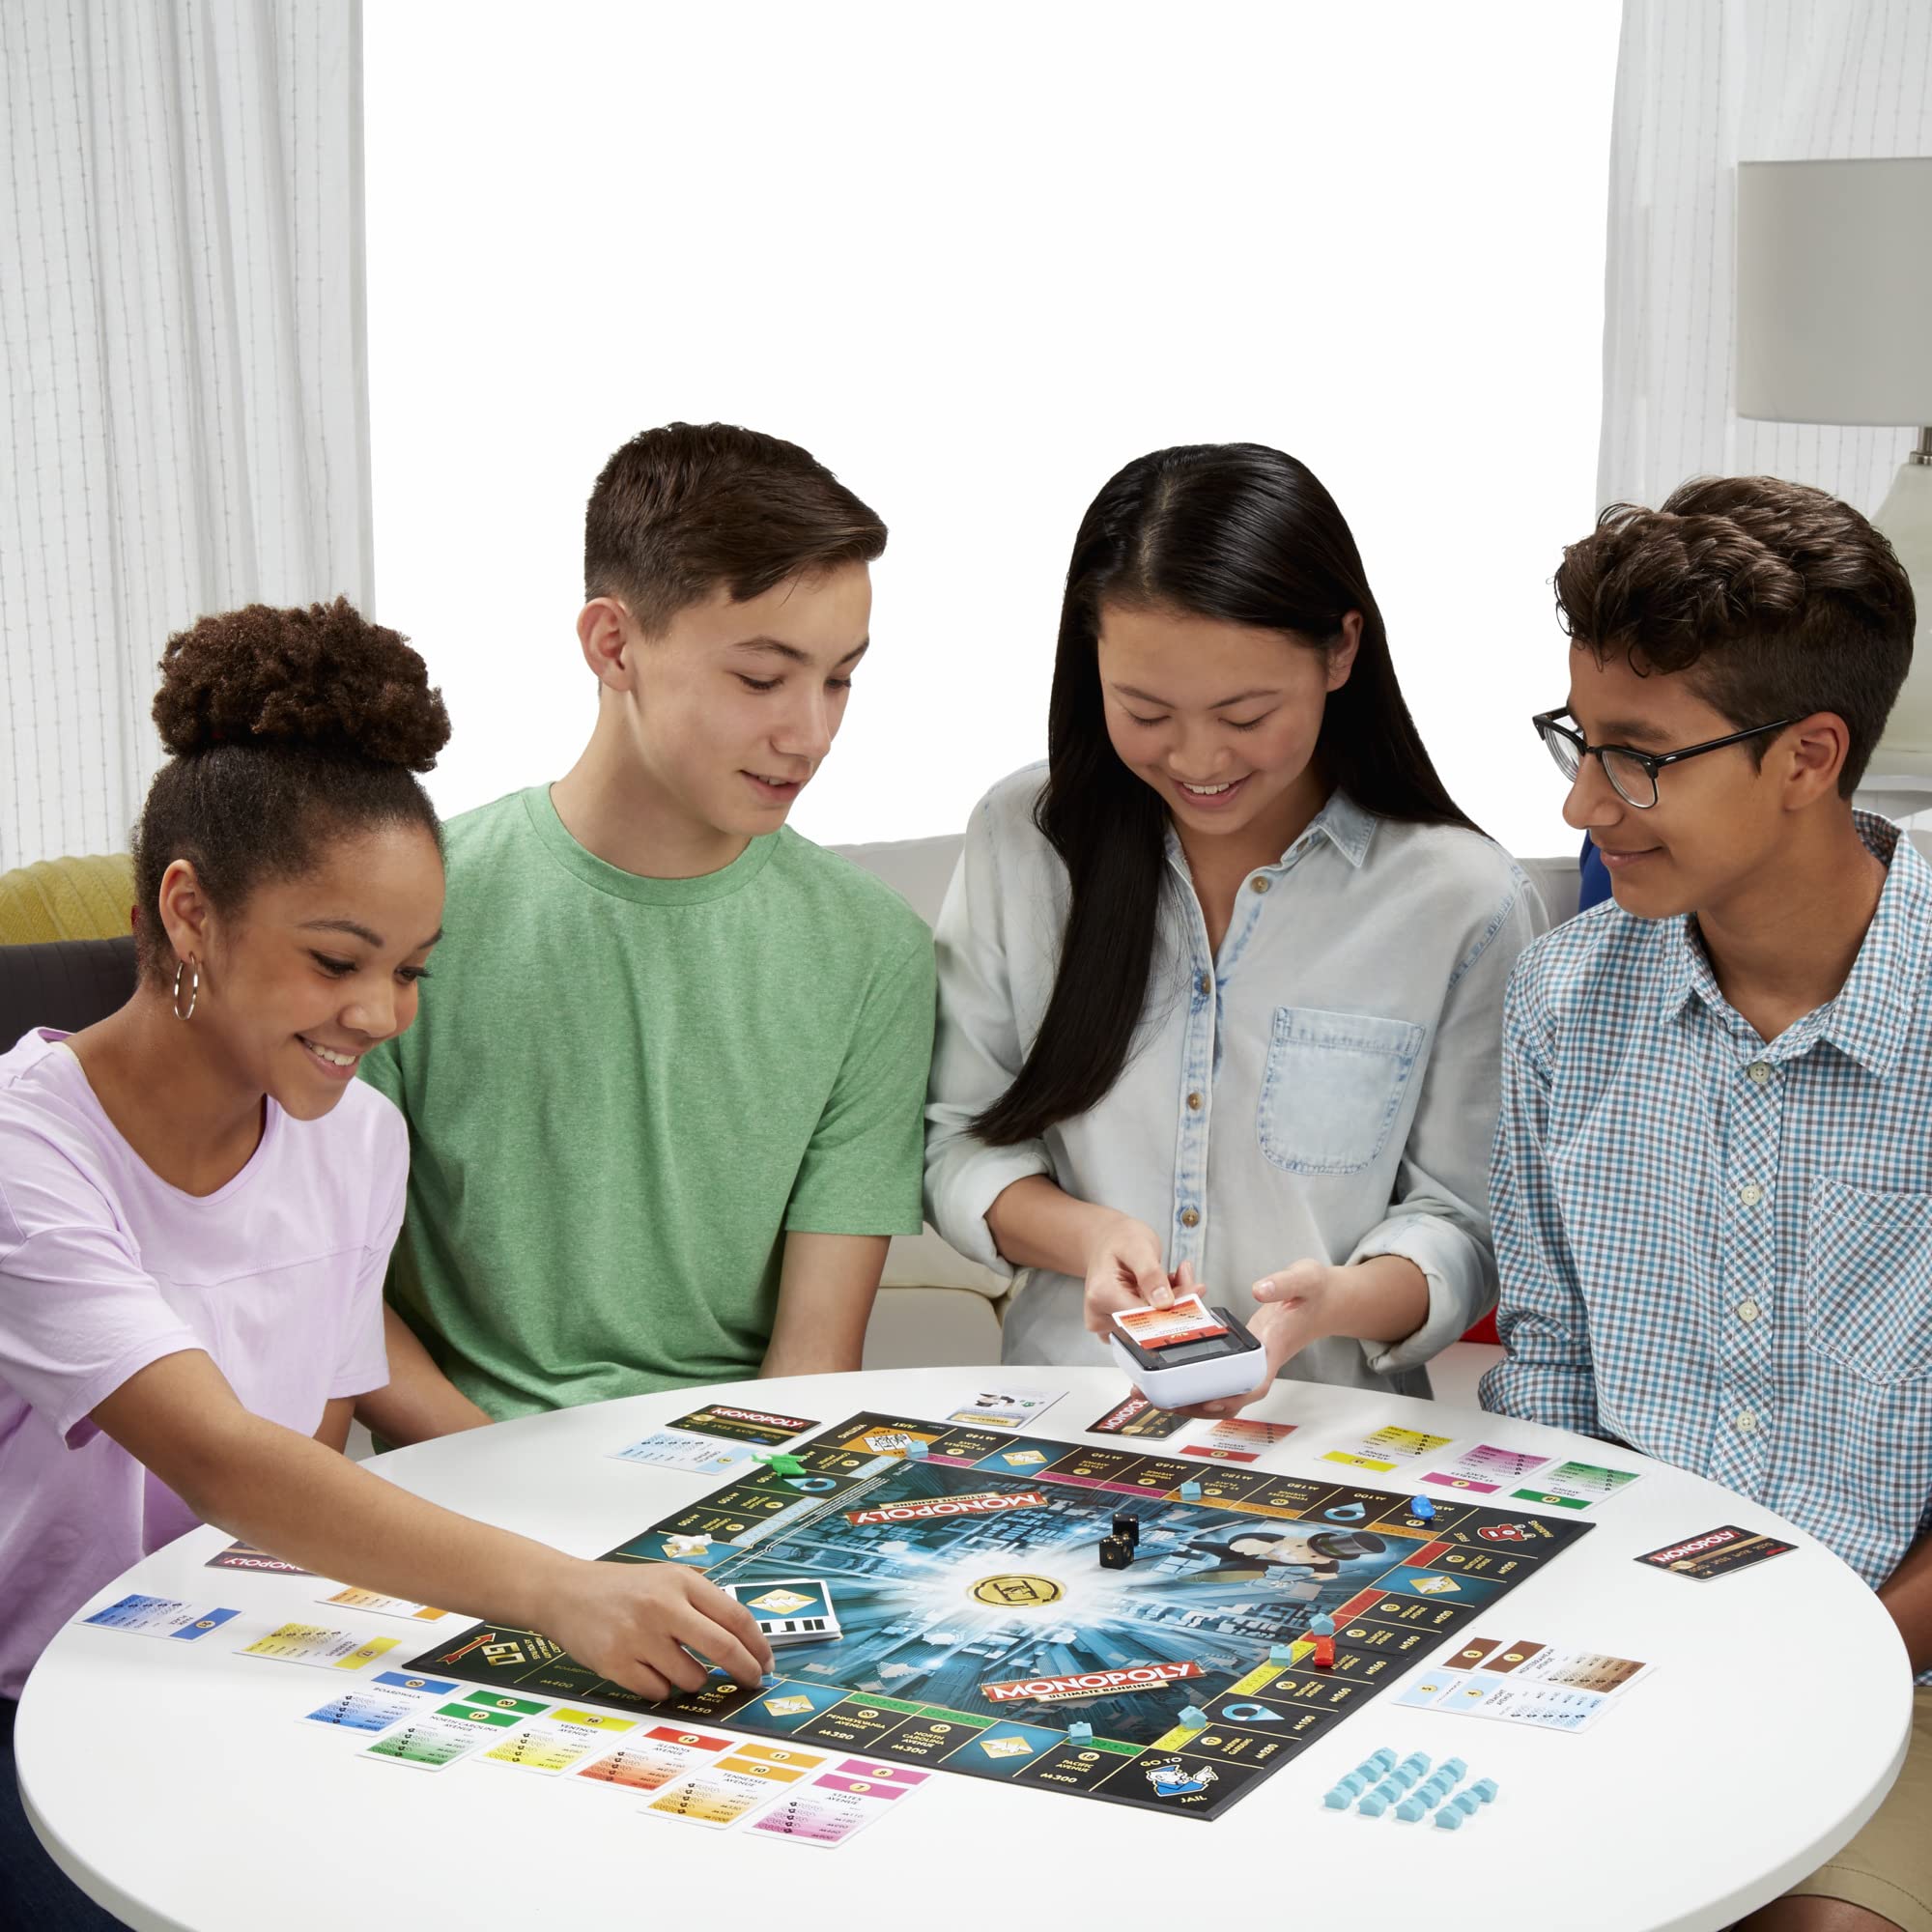 Monopoly Ultimate Banking Edition Board Game for Families and Kids Ages 8 and Up, Electronic Banking Unit (Amazon Exclusive)